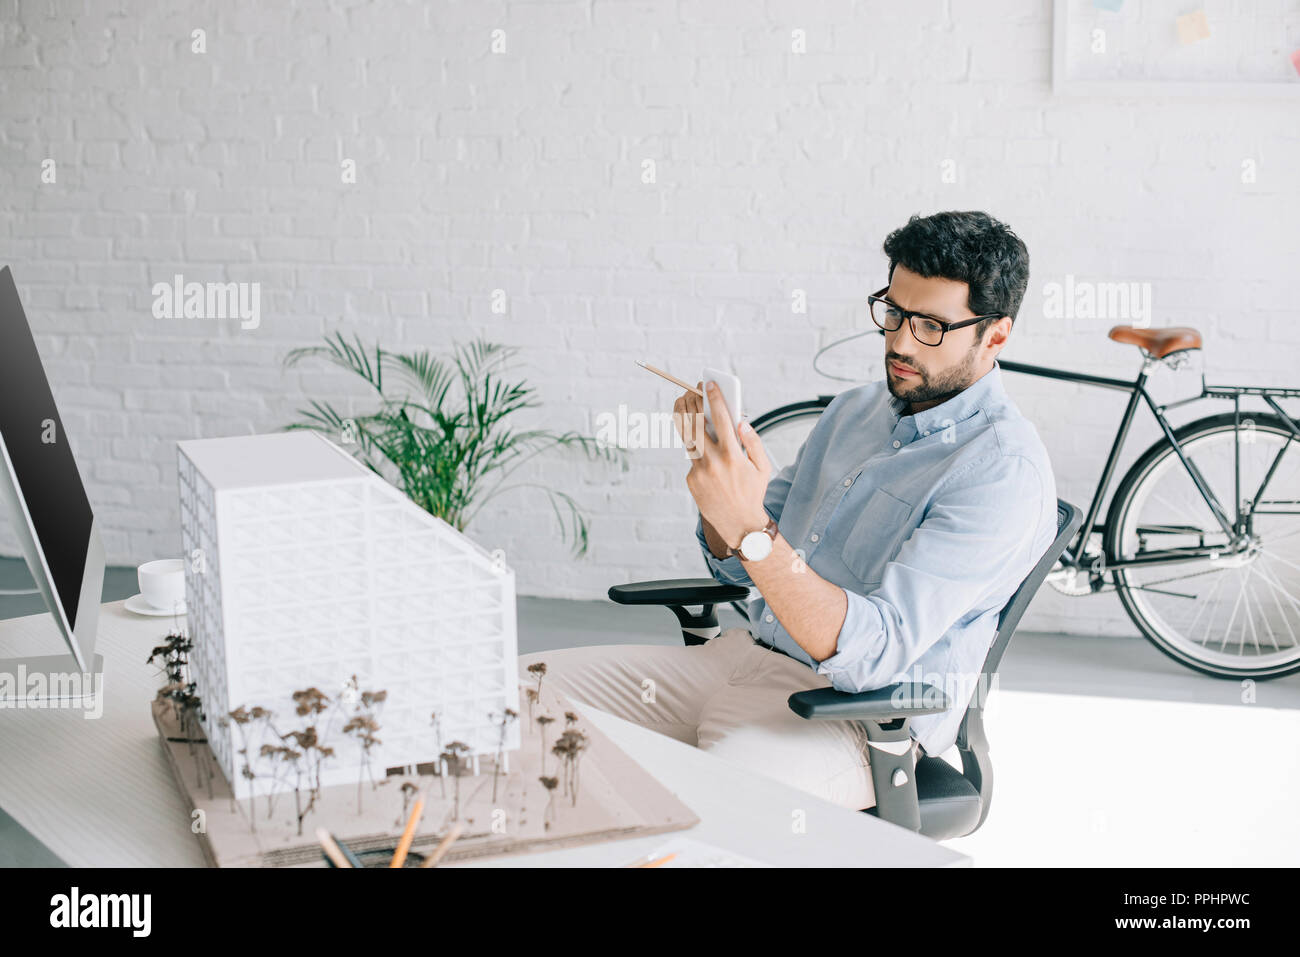 handsome architect using smartphone near architecture model in office Stock Photo